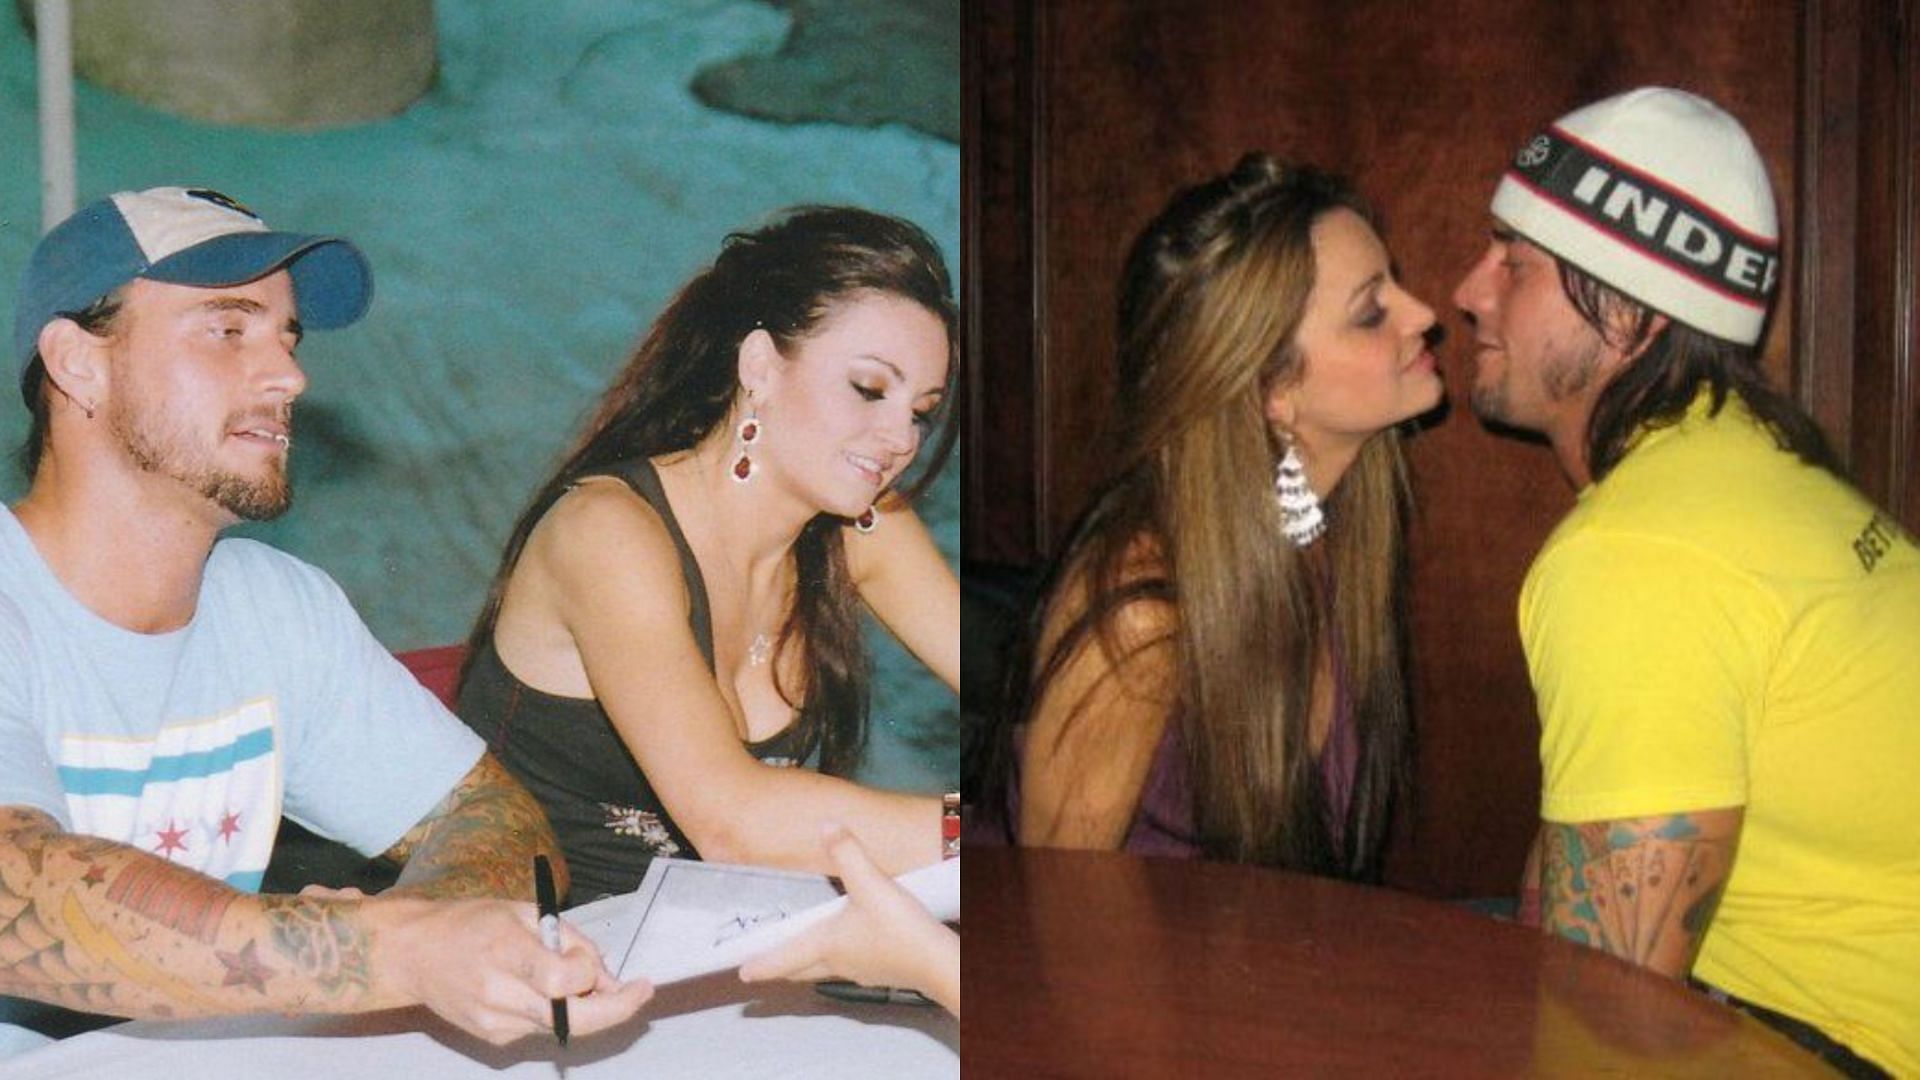 CM Punk dated Maria Kanellis between 2005 and 2007